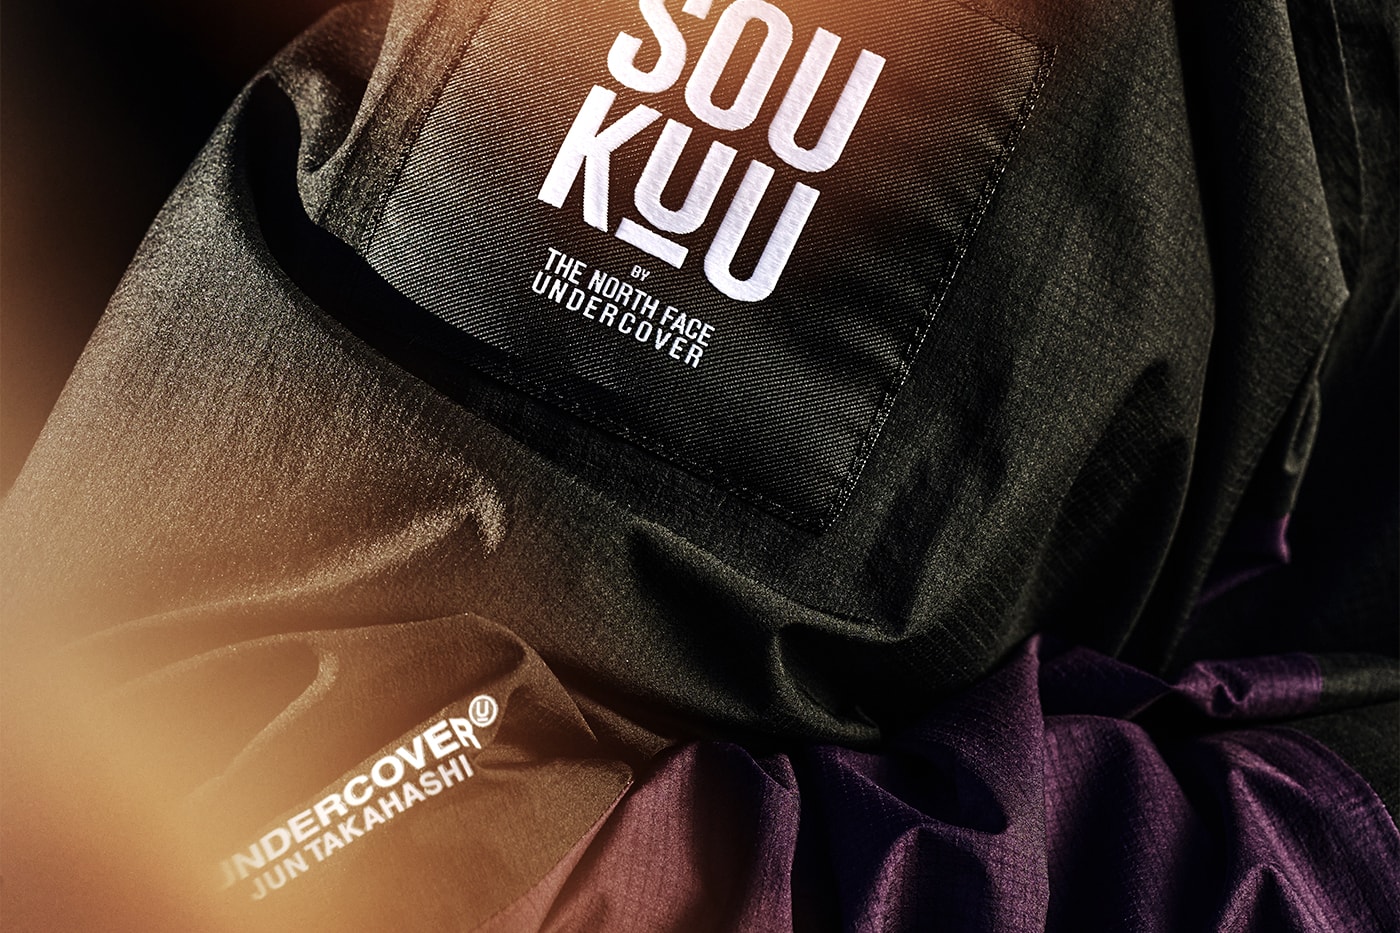 The North Face x UNDERCOVER Drop Second Collaboration "SOUKUU Season 2" japanese streetwear trailwear line parka outdoor practical pieces jun takahashi